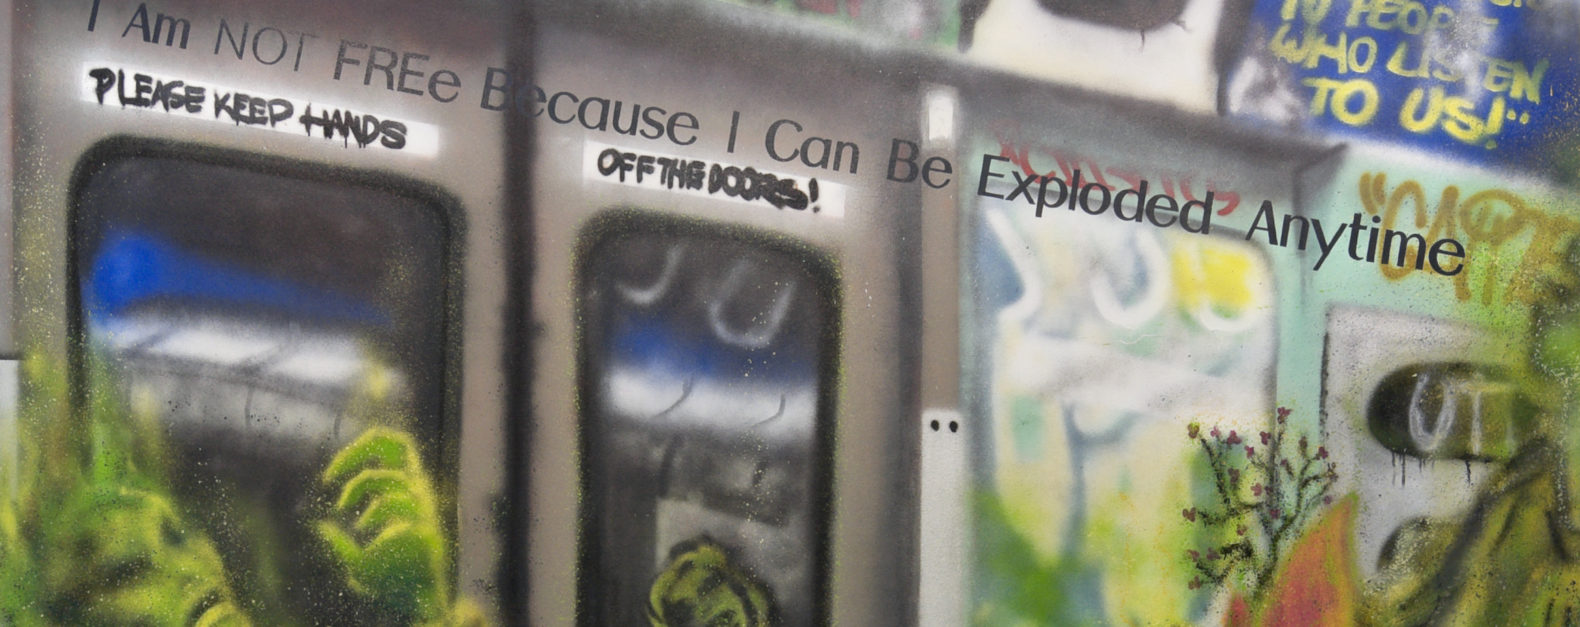 Lady Pink feature image, graffiti figure with "I am not free because I can be exploded anytime" text overlaid